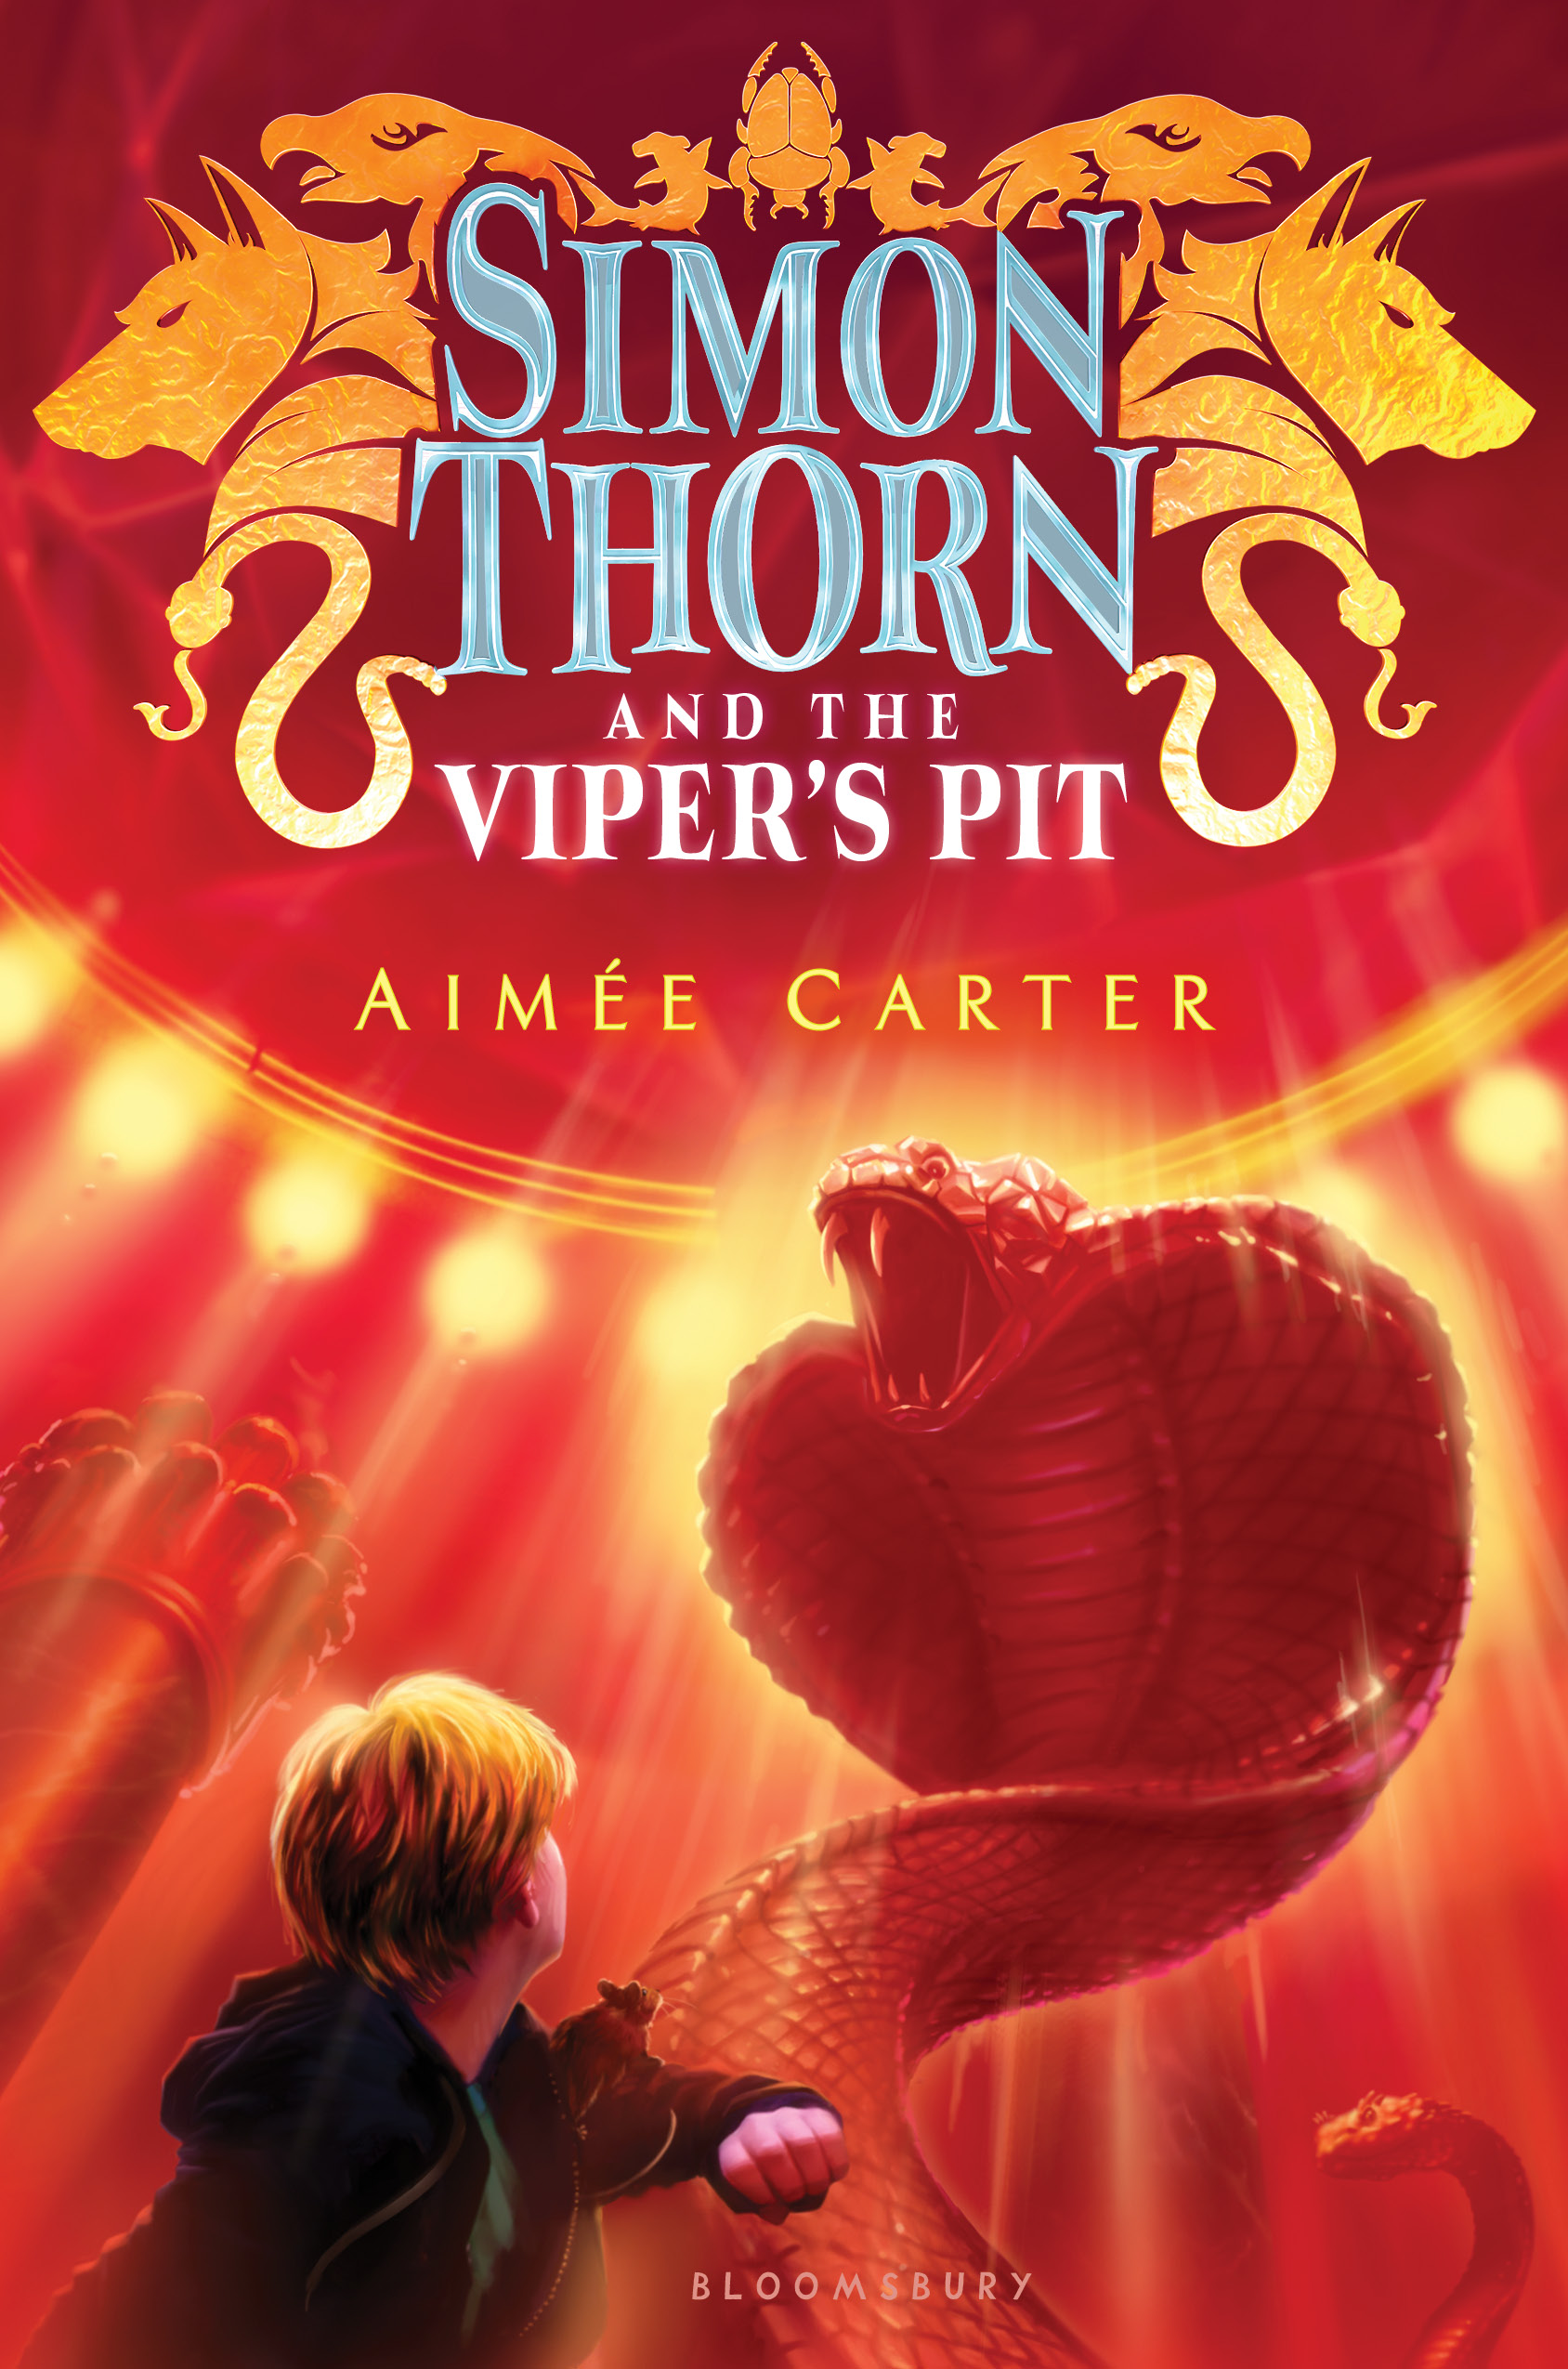 Bücherblog. Rezension. Book cover. Simon Thorn and the viper's pit (Book 2) Aimée Carter. Fantasy. Young Adult.